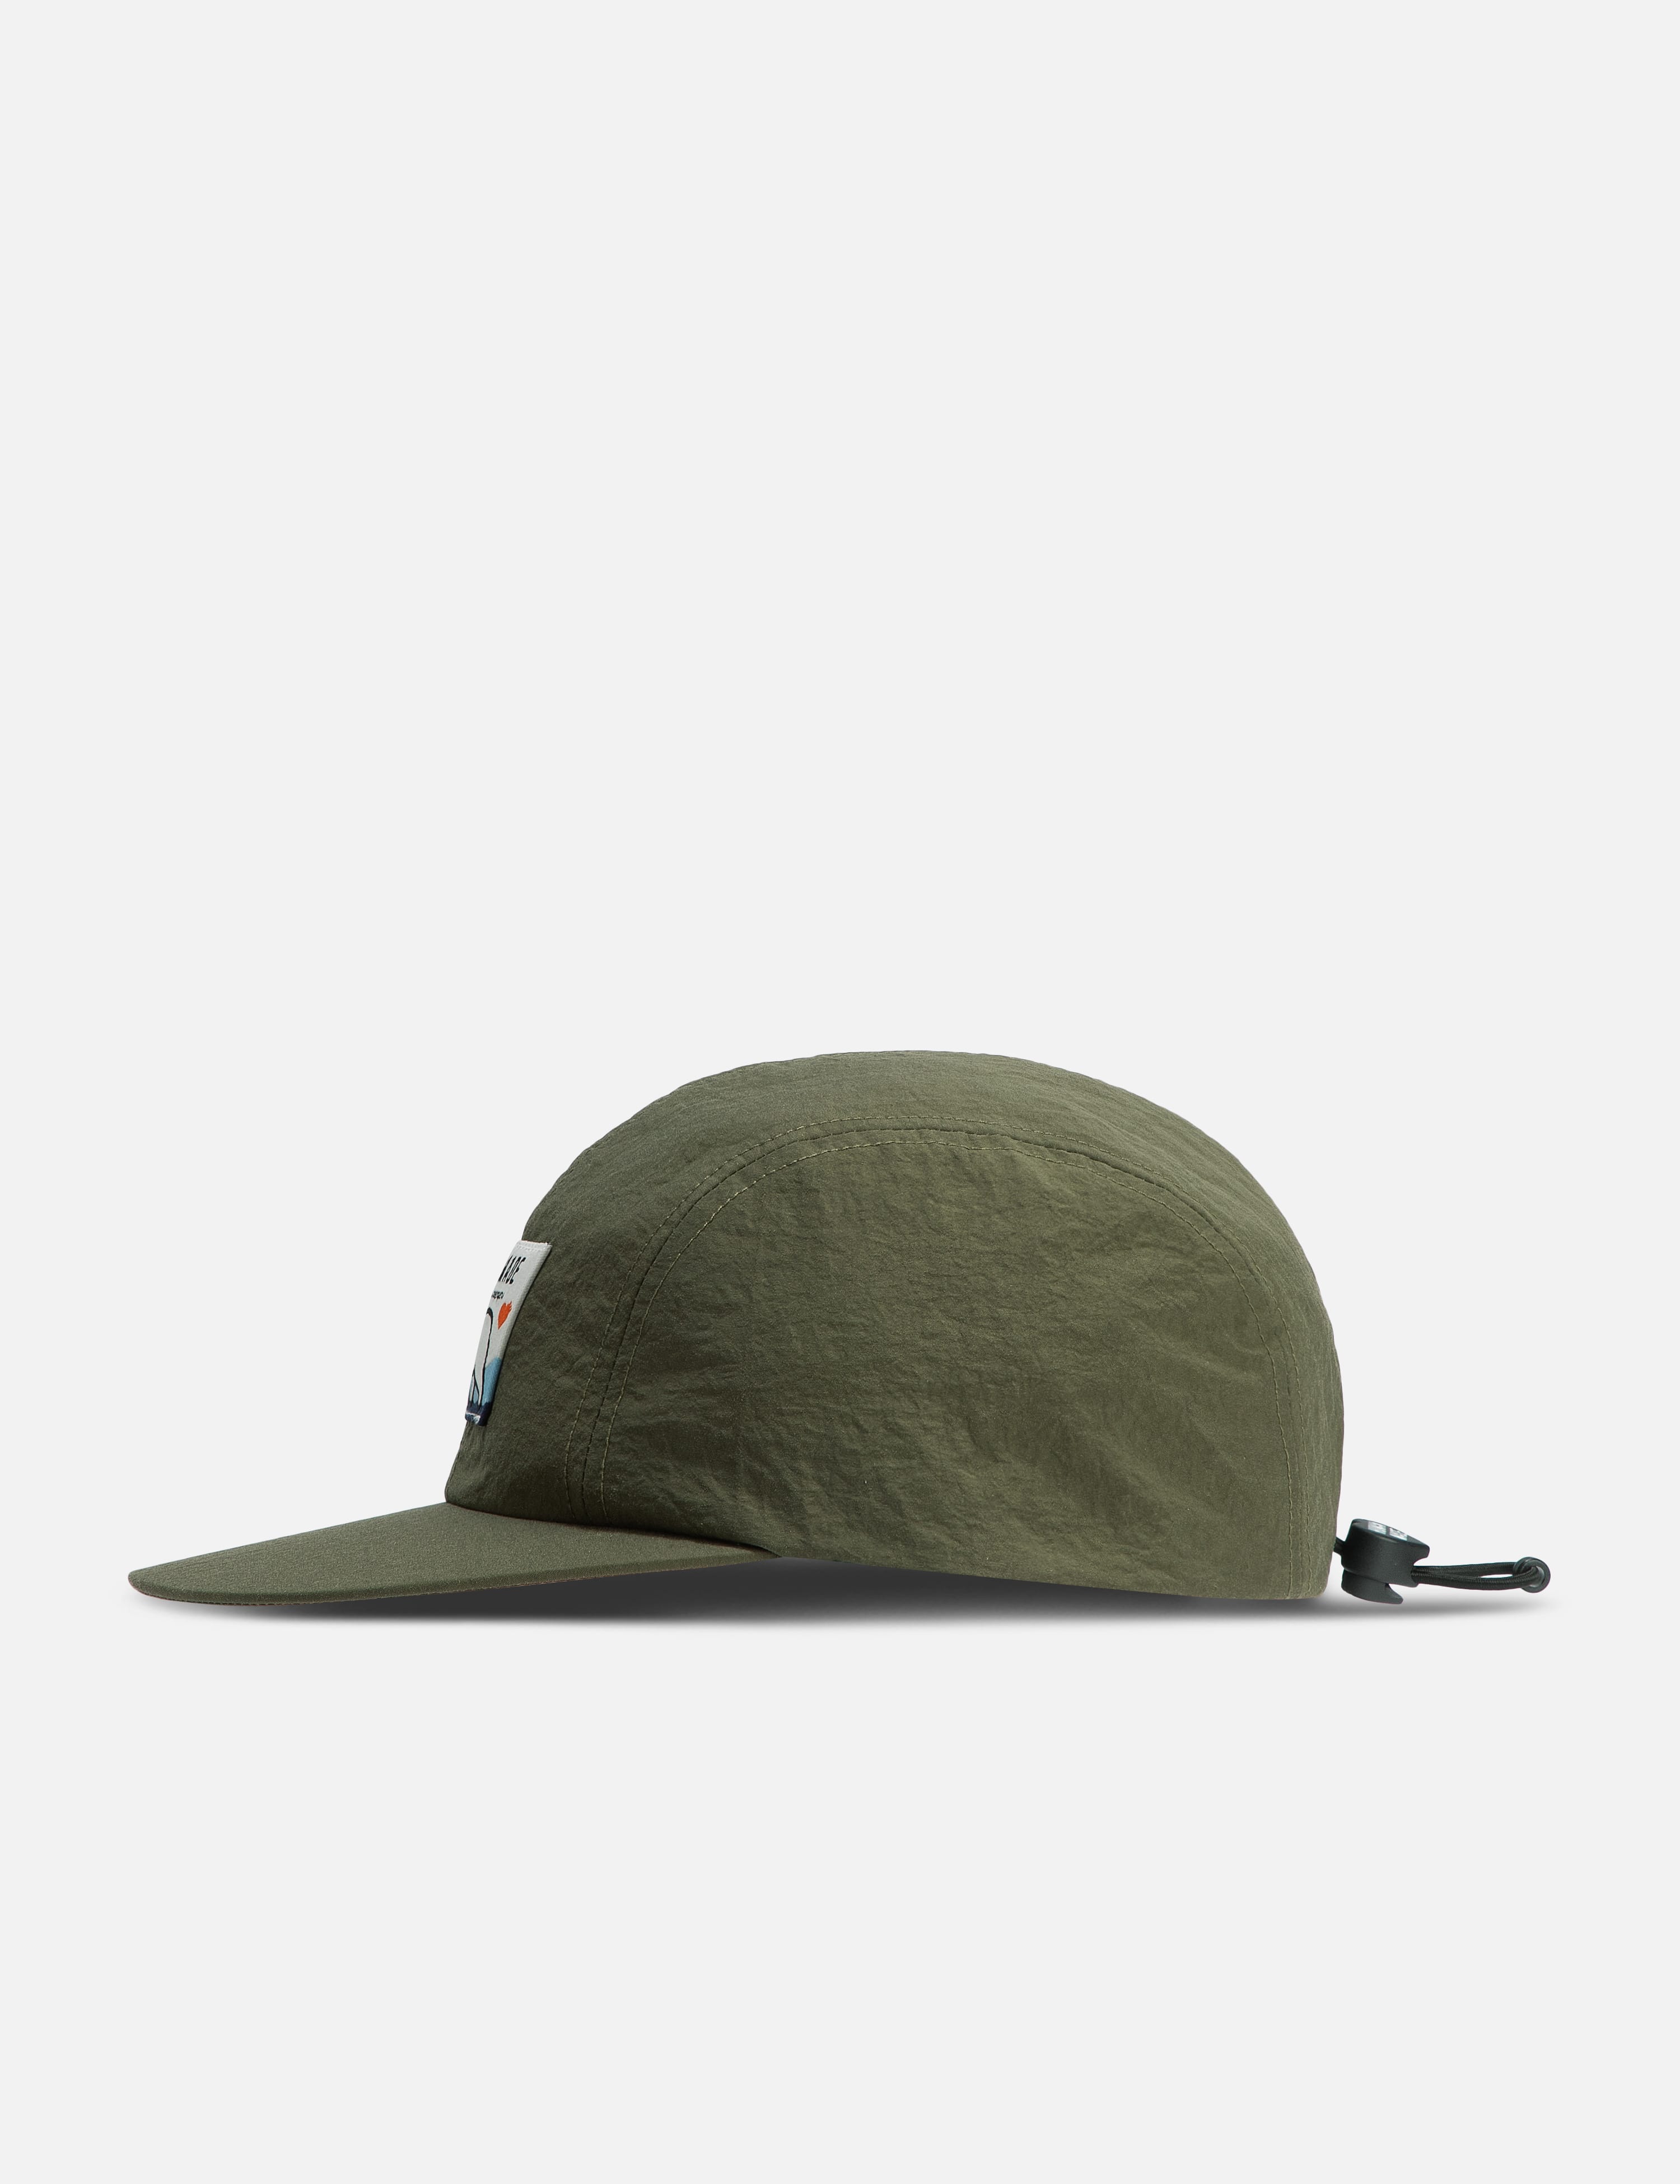 Human Made - Camping Cap | HBX - Globally Curated Fashion and